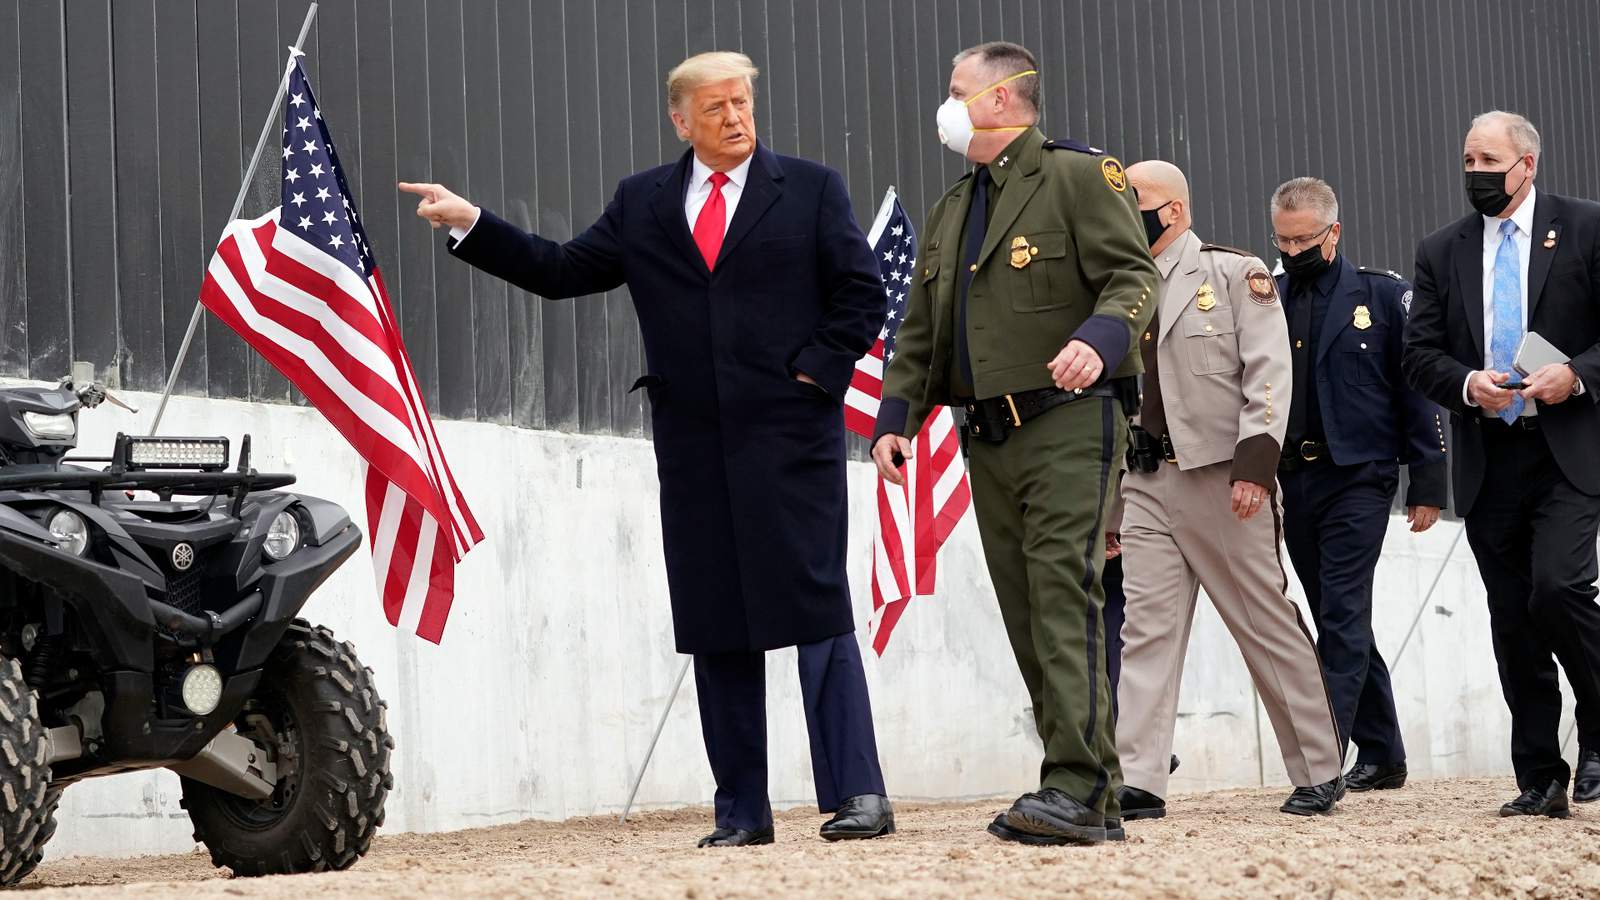 President Donald Trump celebrates building of border wall during visit to Rio Grande Valley